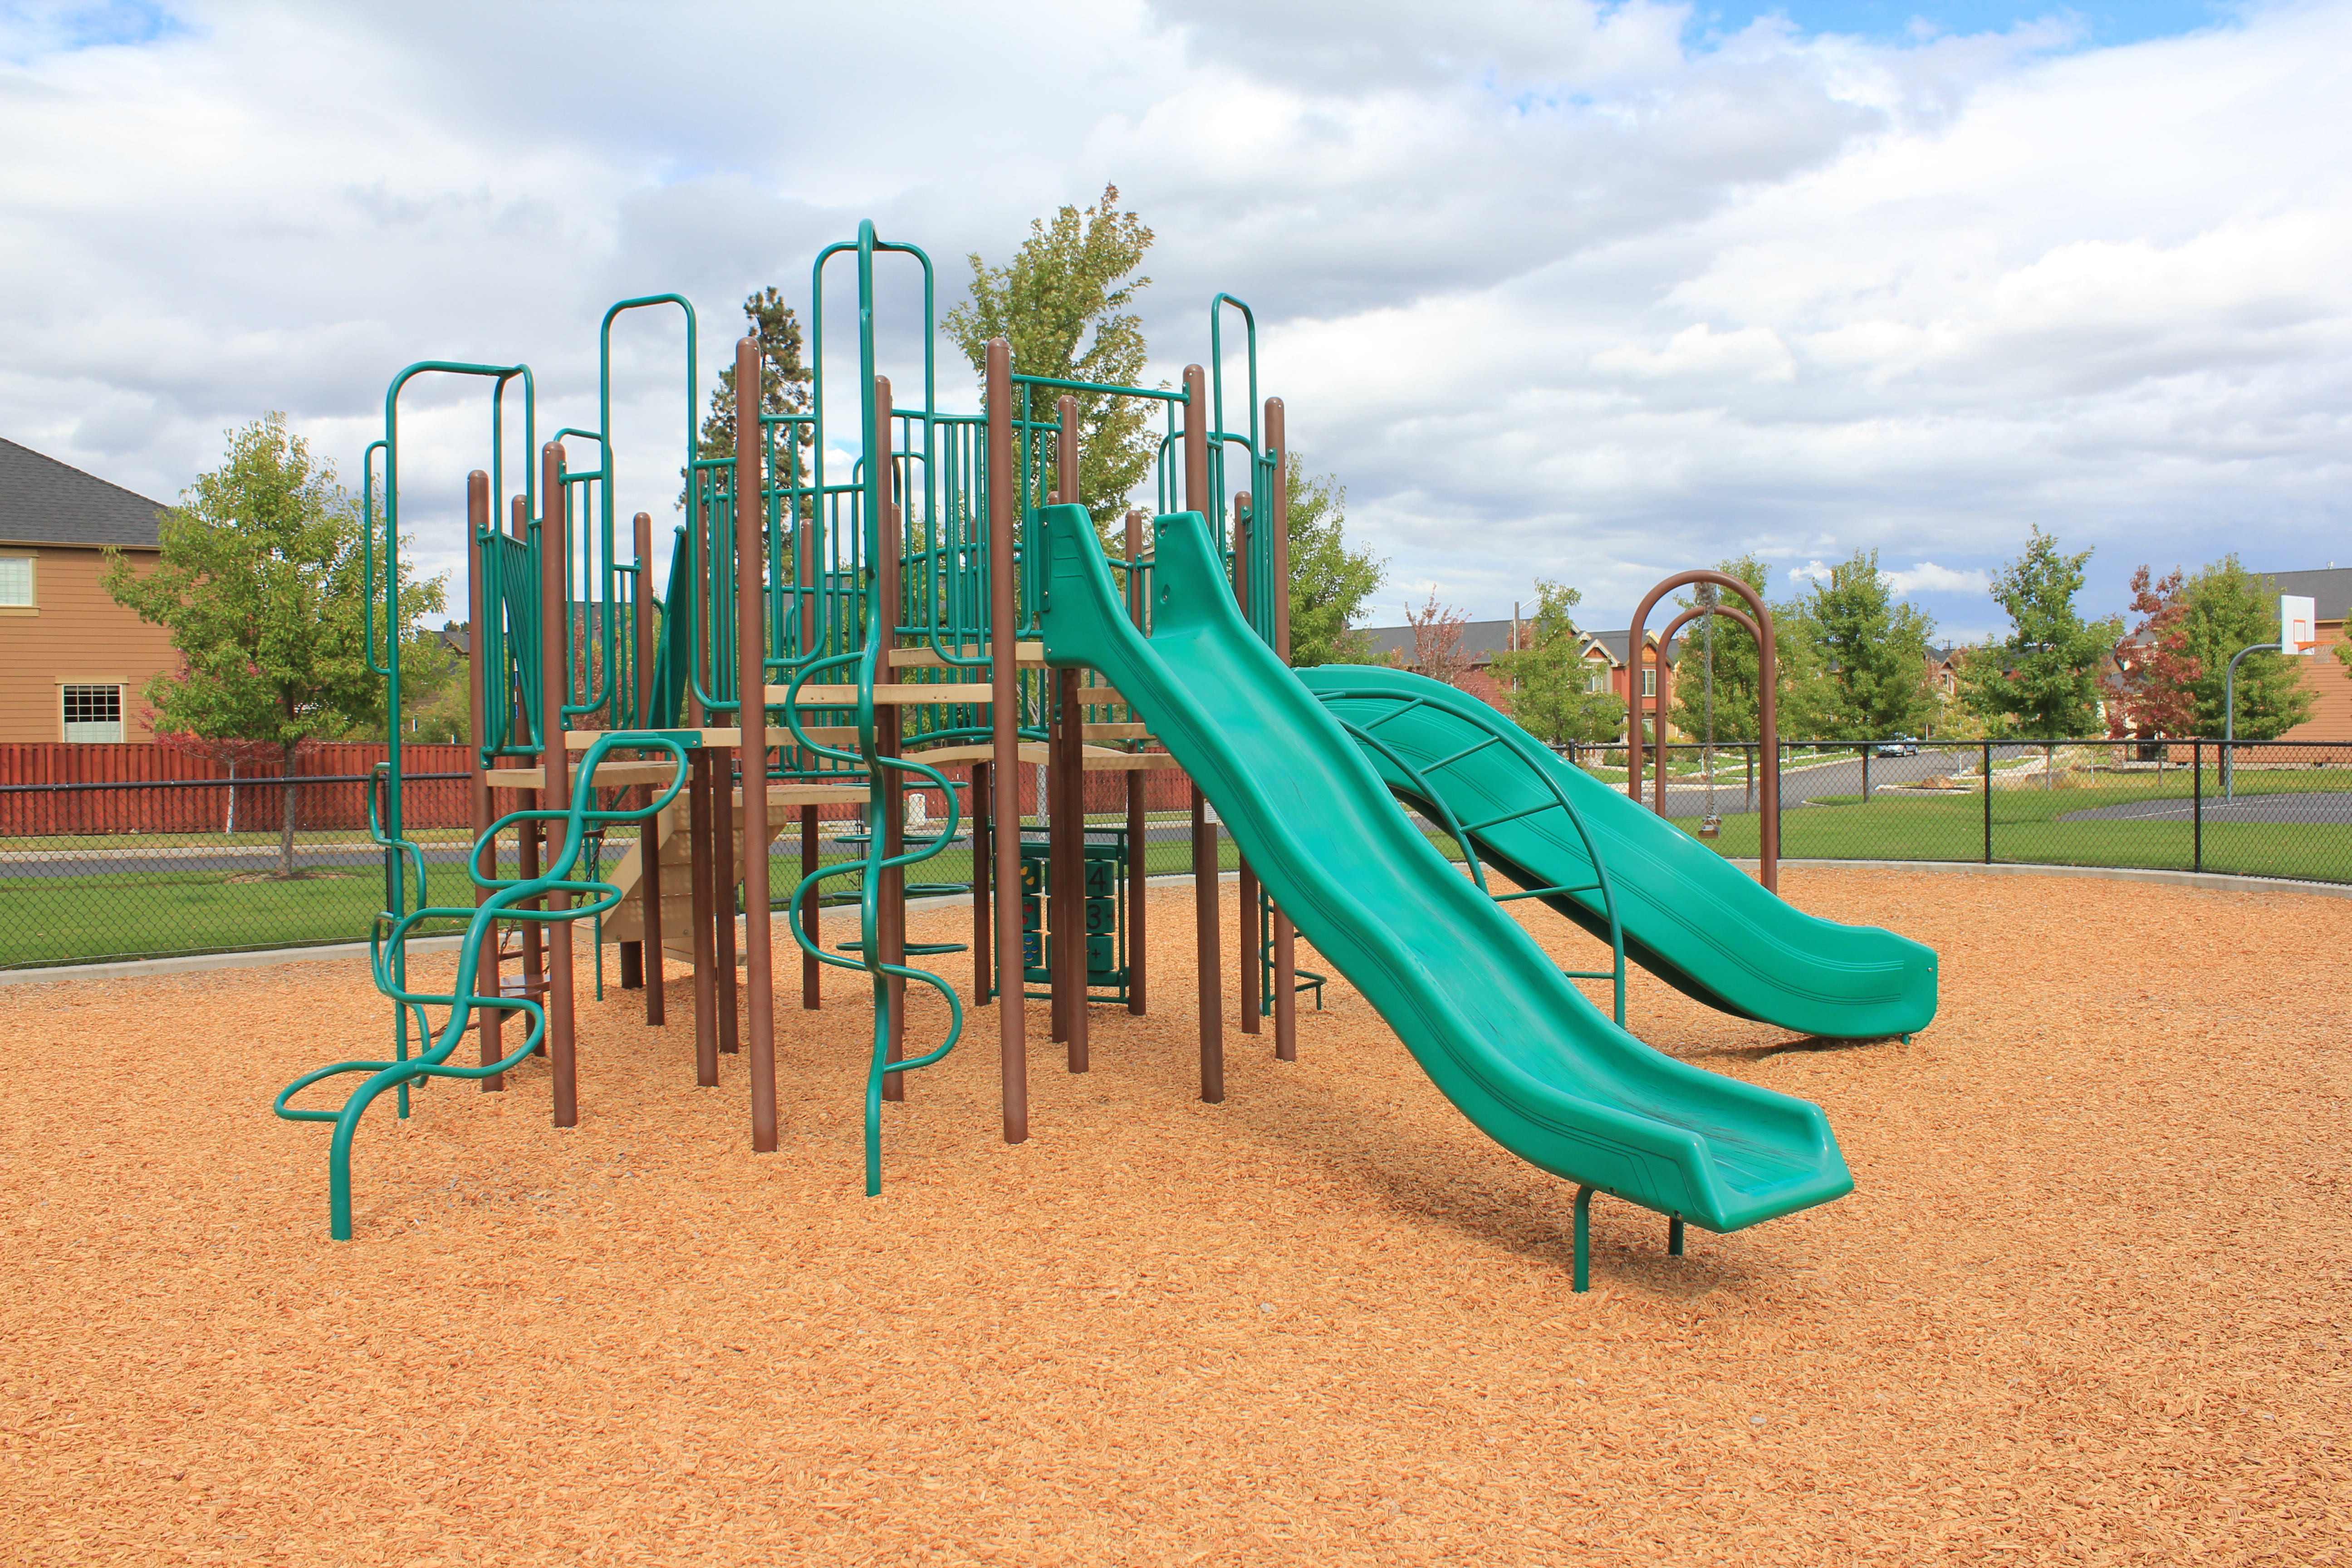 The playground at Sun Meadow Park